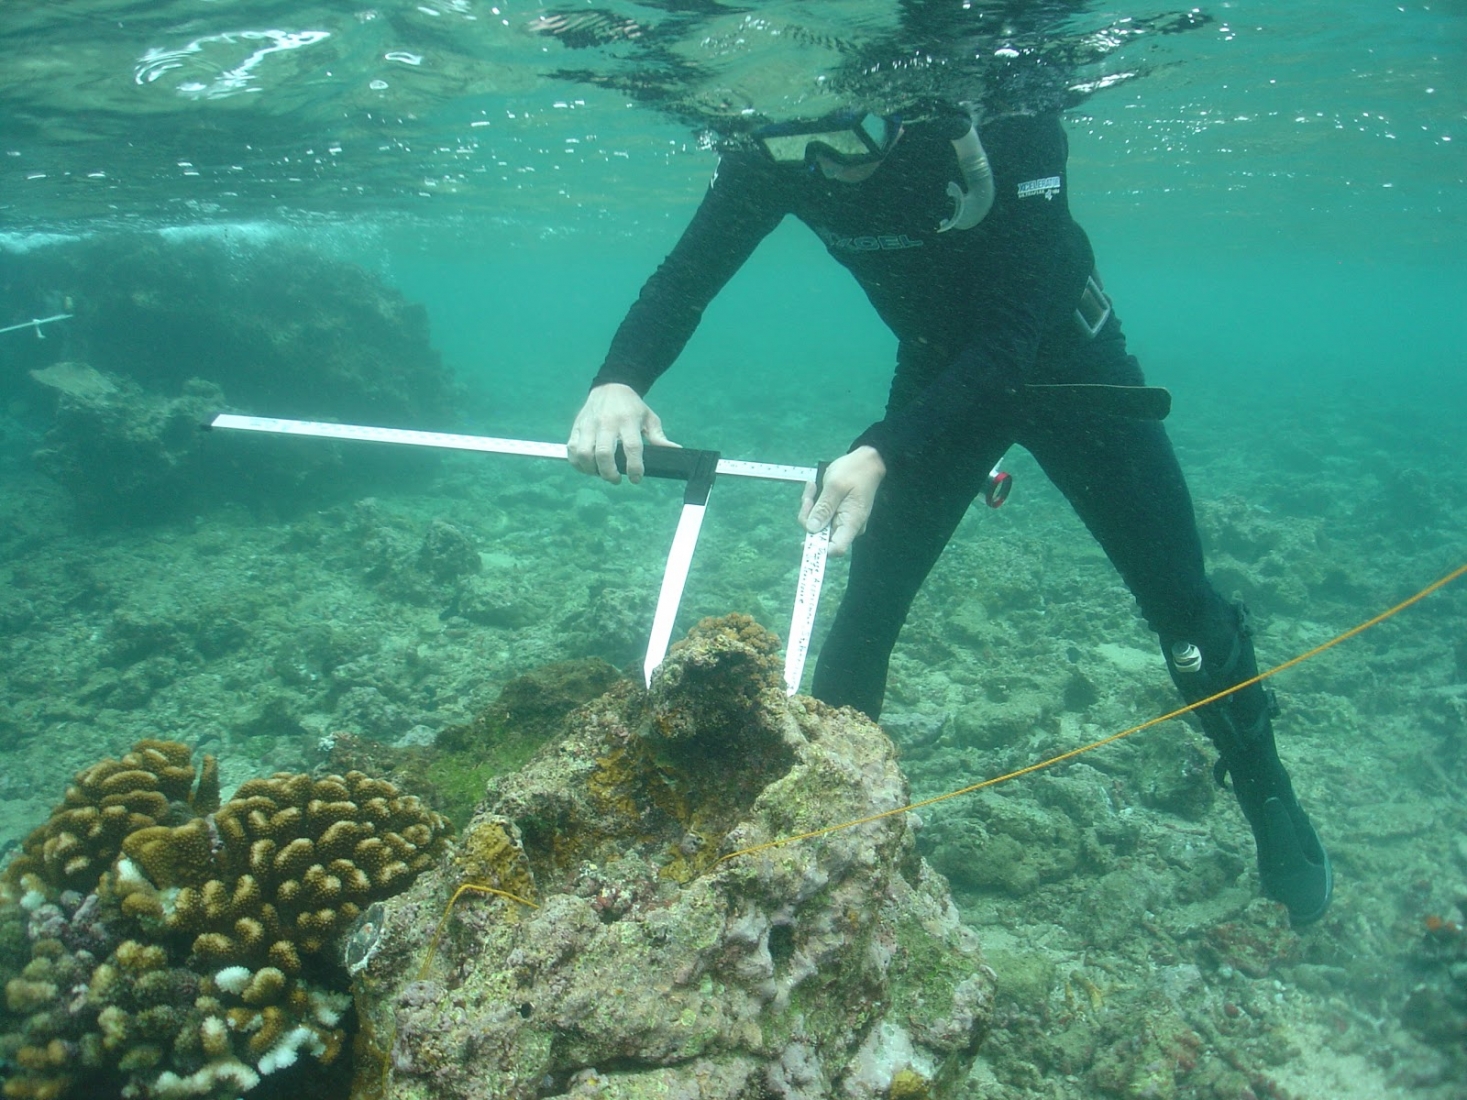 An underwater image of a diver using a measuring instrument to survey coral.